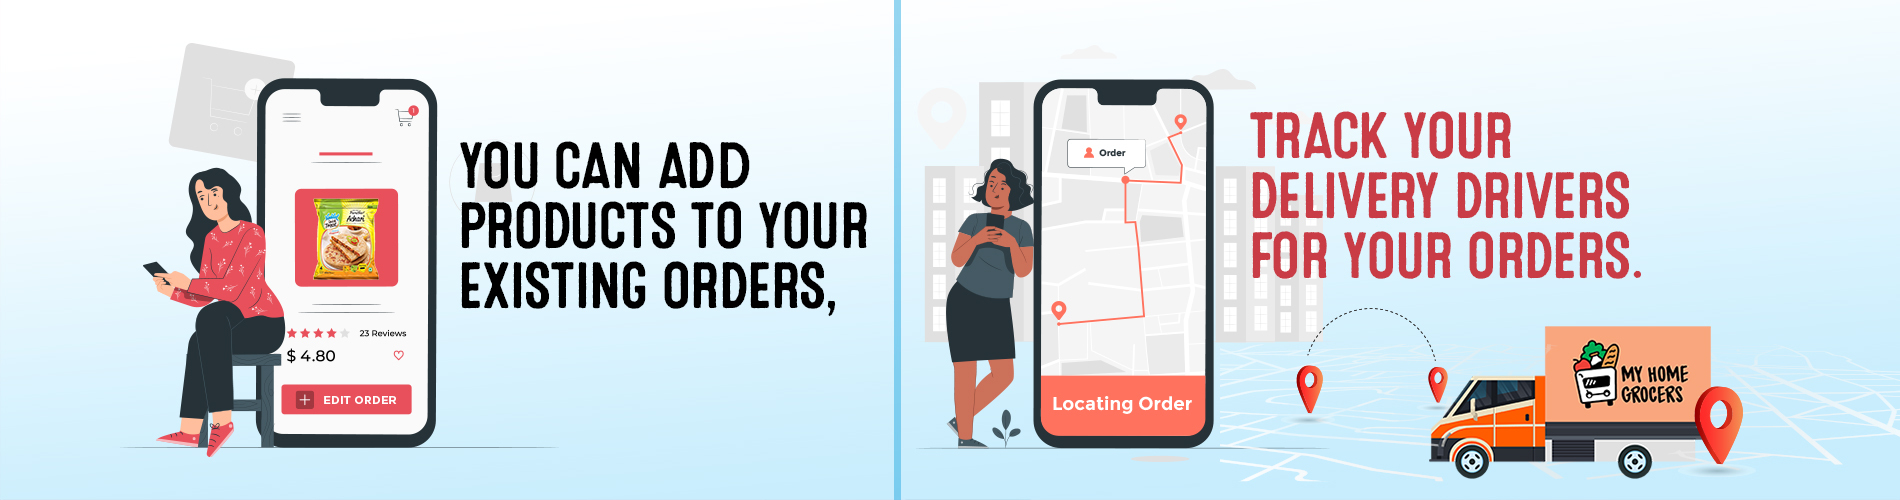 You can add products to your existing orders & Track your delivery drivers for your orders